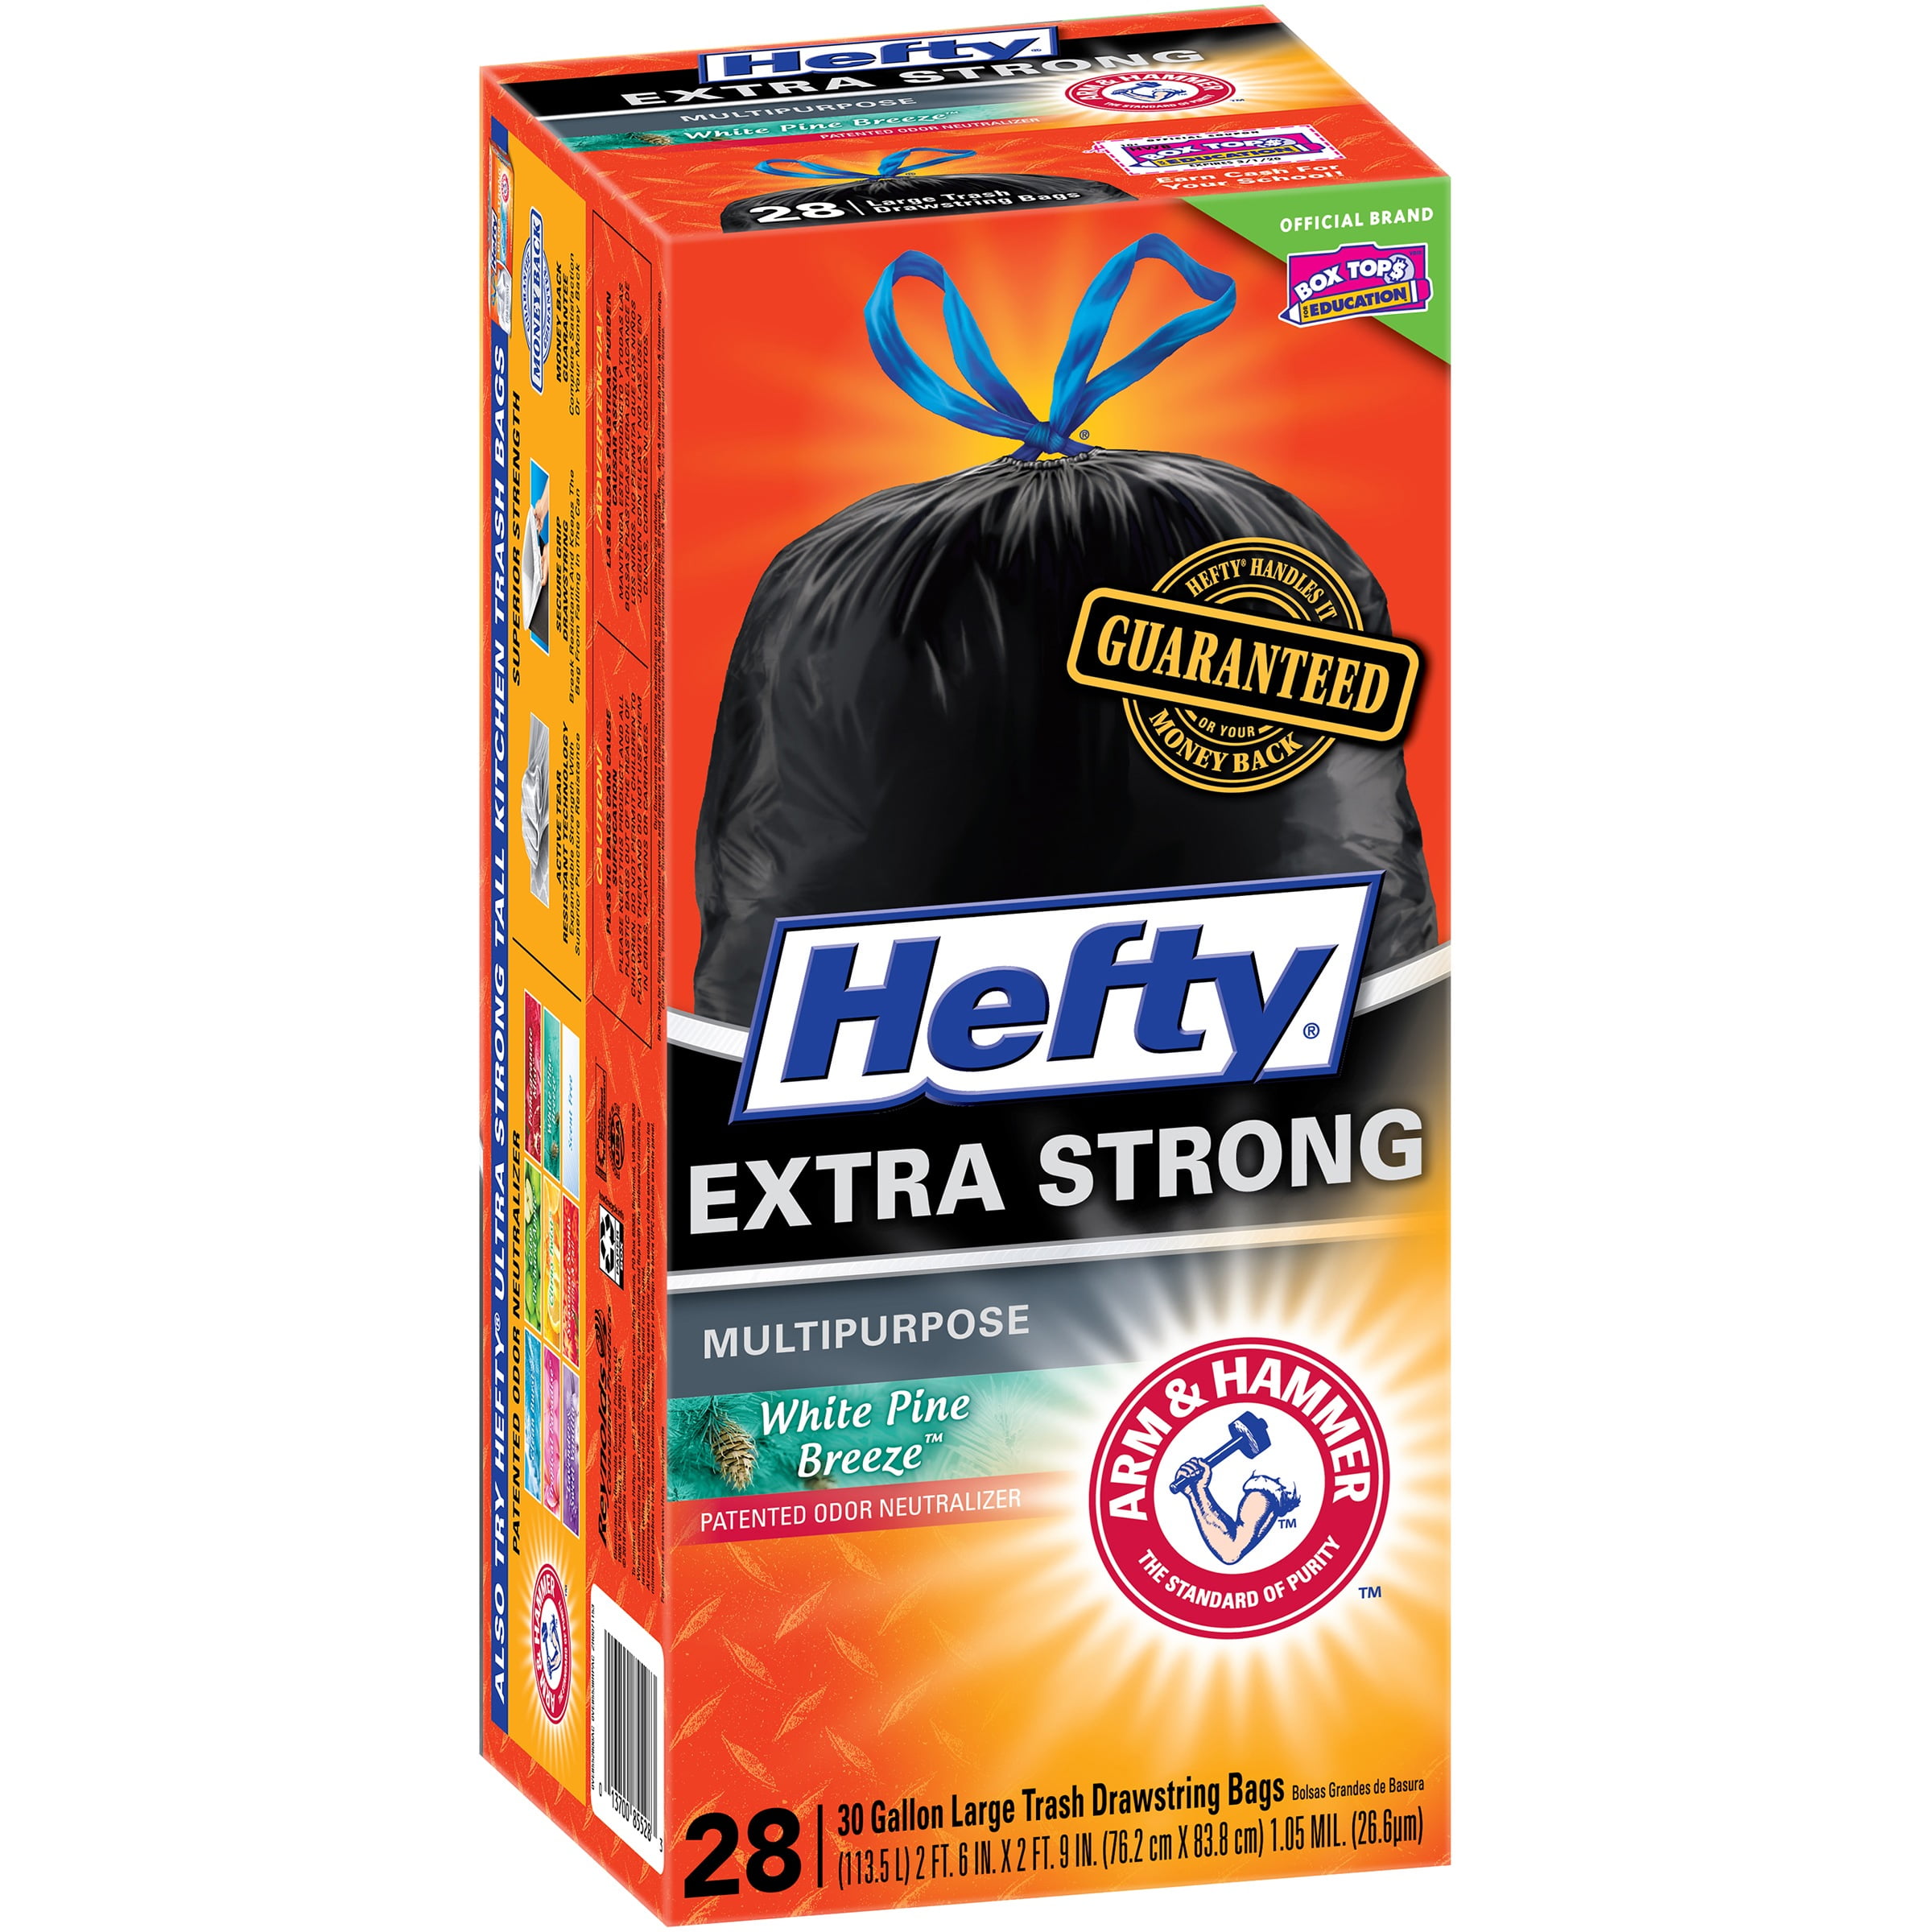 Hefty Arm & Hammer Recycling Bags Scent Free 30 Gallons - H Mart